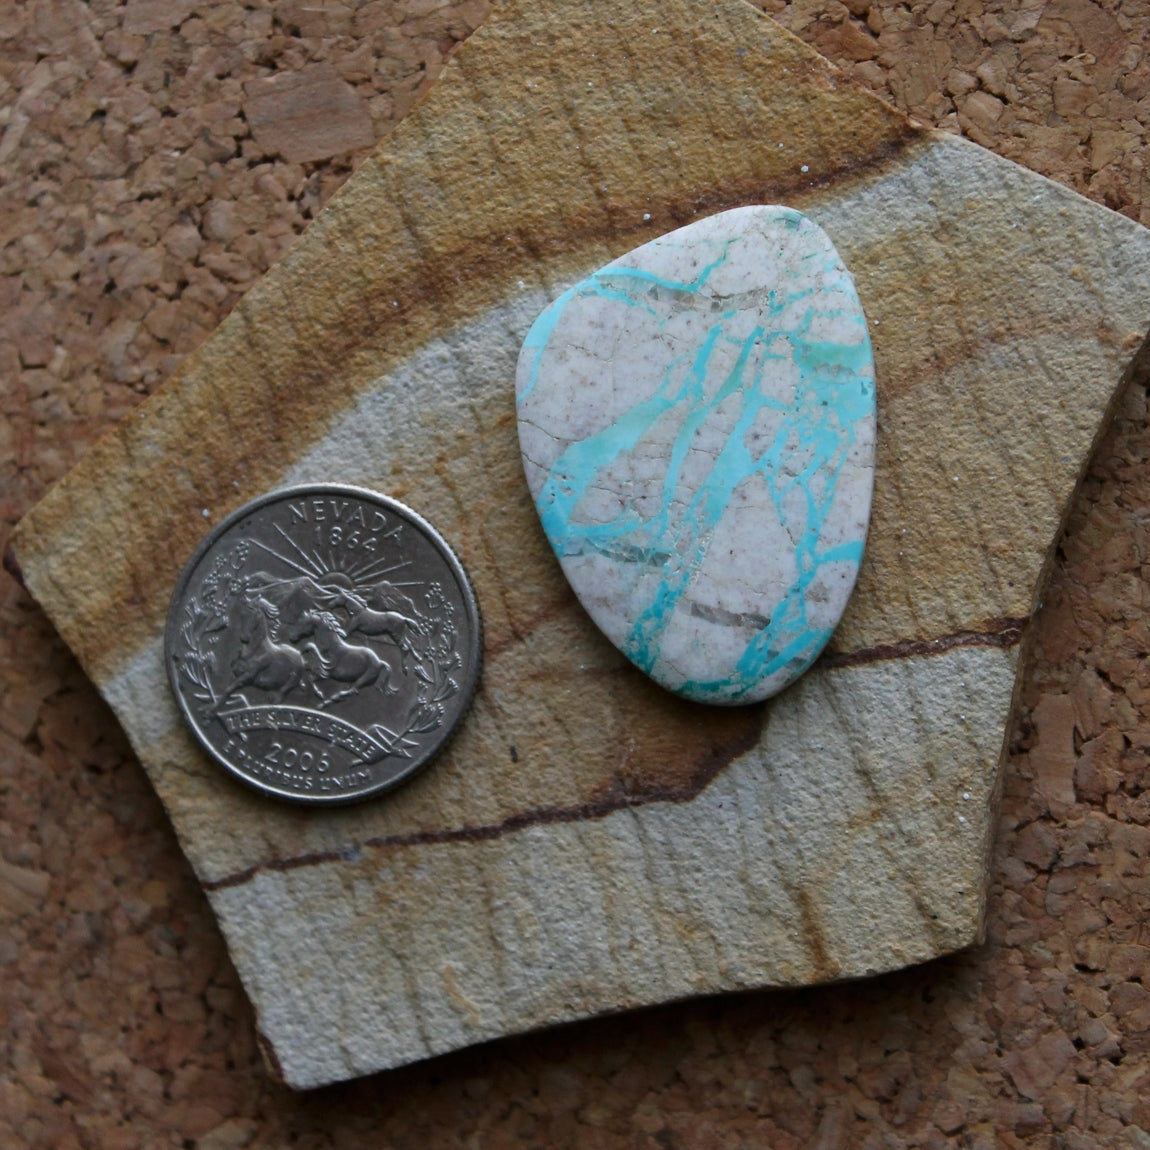 32 carat boulder cut Stone Mountain Turquoise cabochon with icy contrasts